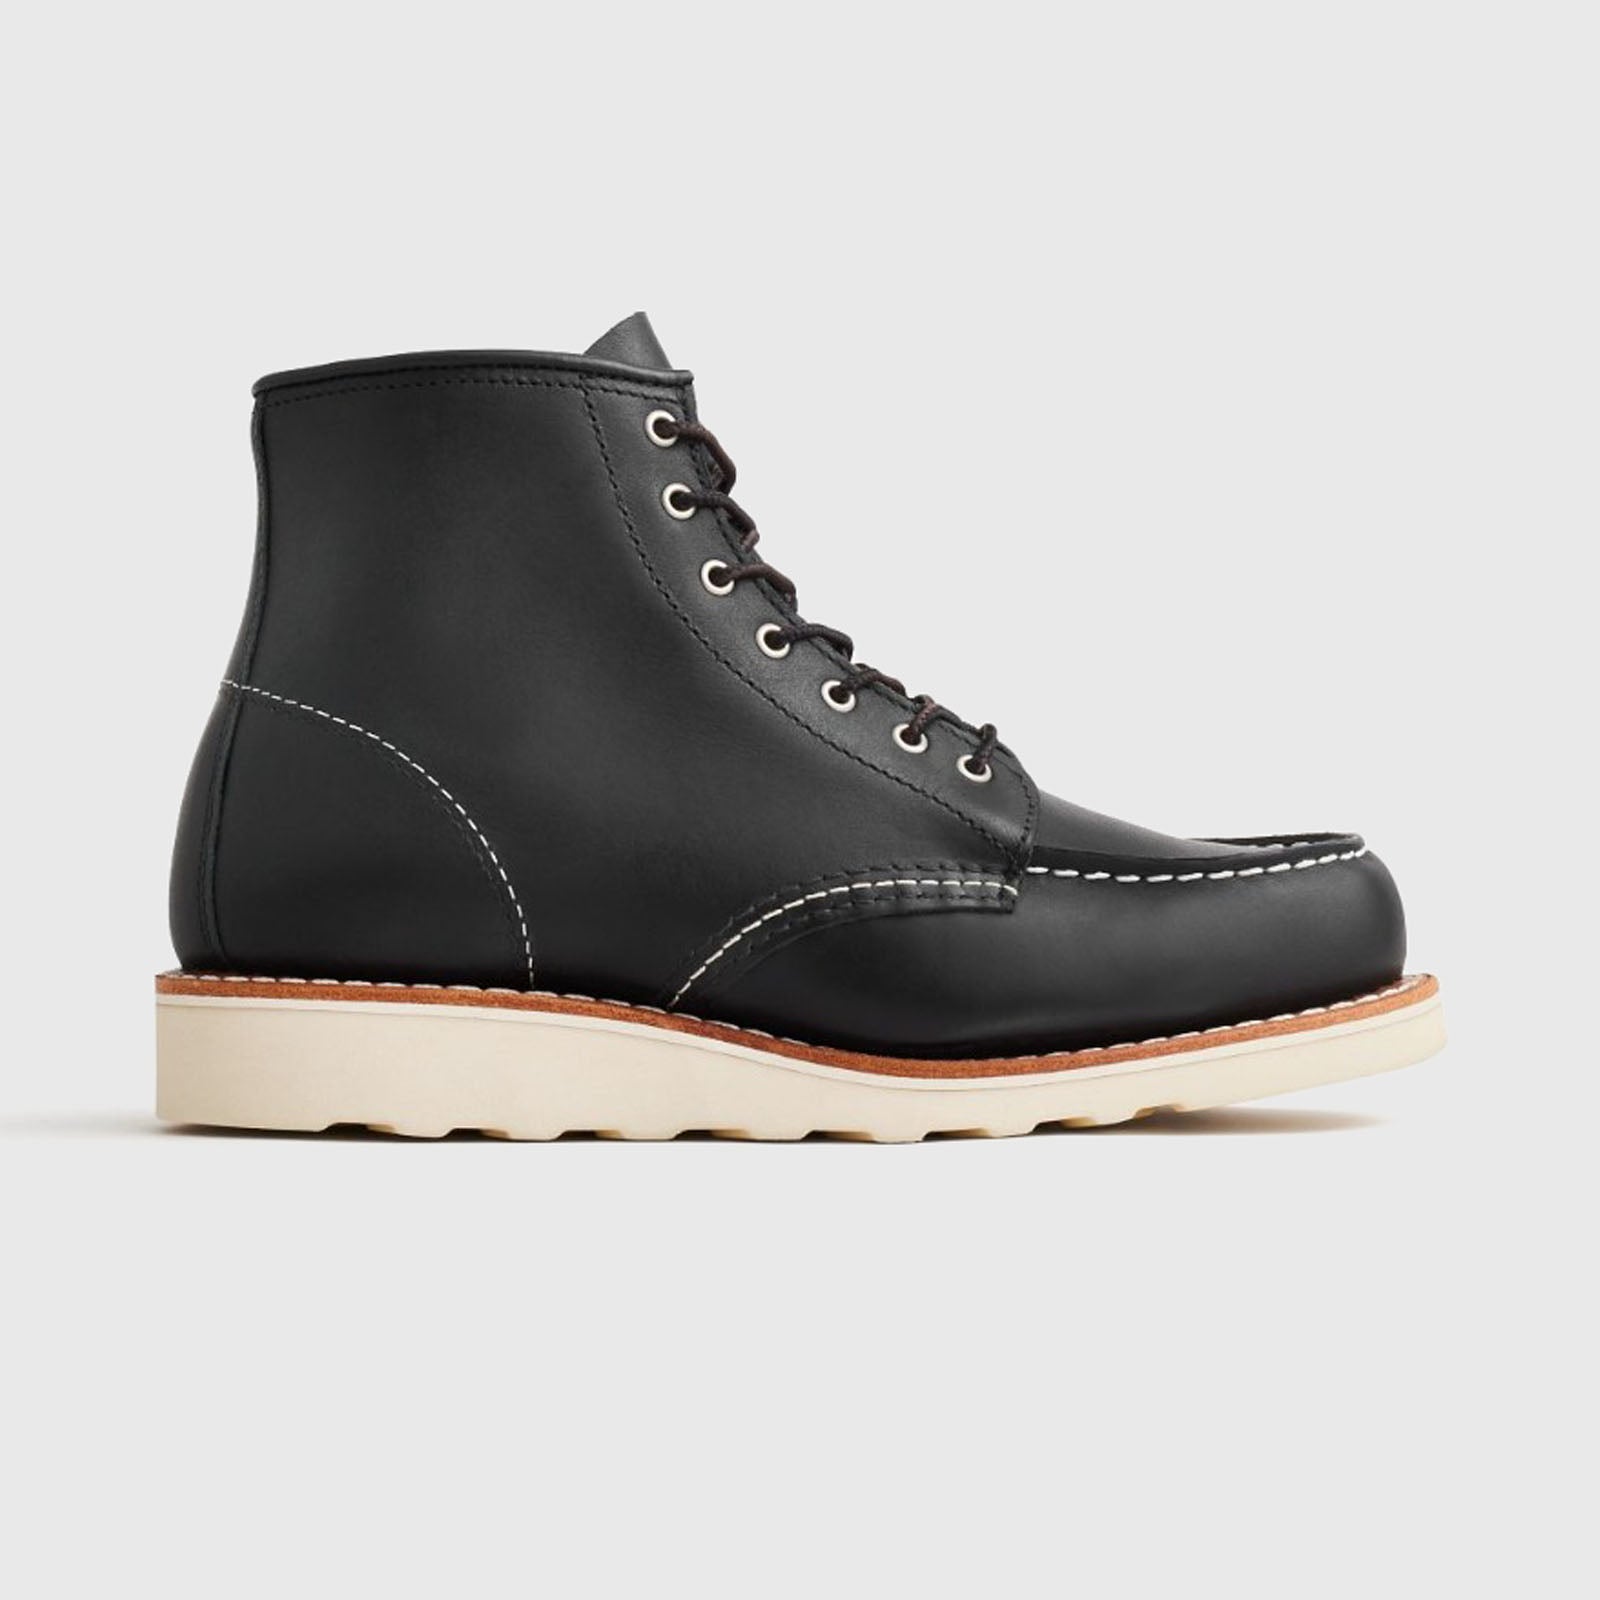 Red Wing 6-Inch Classic Moc Leather Boot in Black - 7